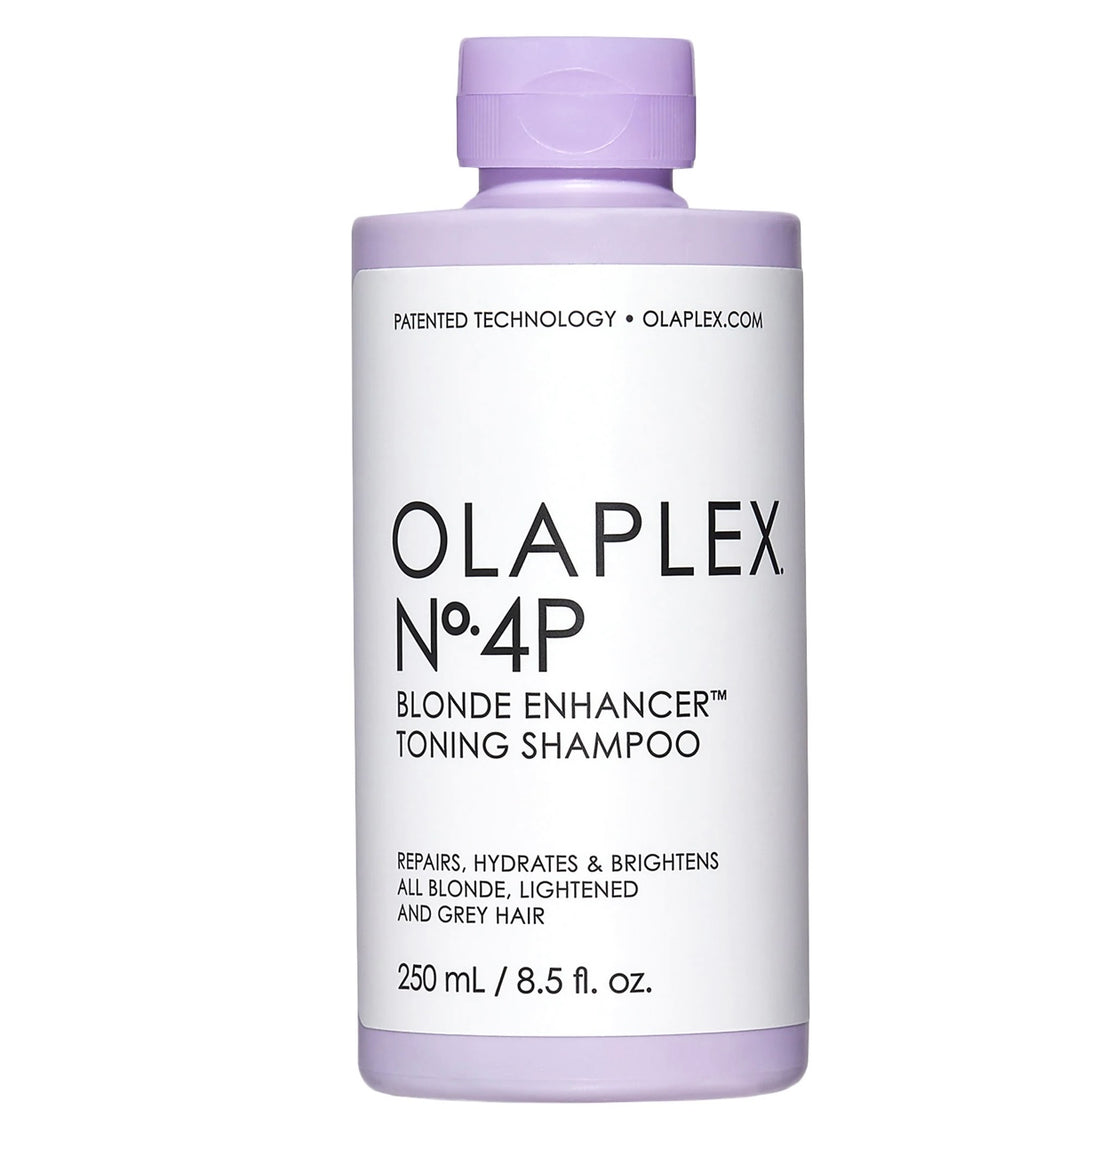 Olaplex No 4 Blonde Enhancer Toning Shampoo | Glow with Kate Beauty Medical Grade Skincare and Haircare in Florence Massachusetts and Cape Cod Massachusetts 